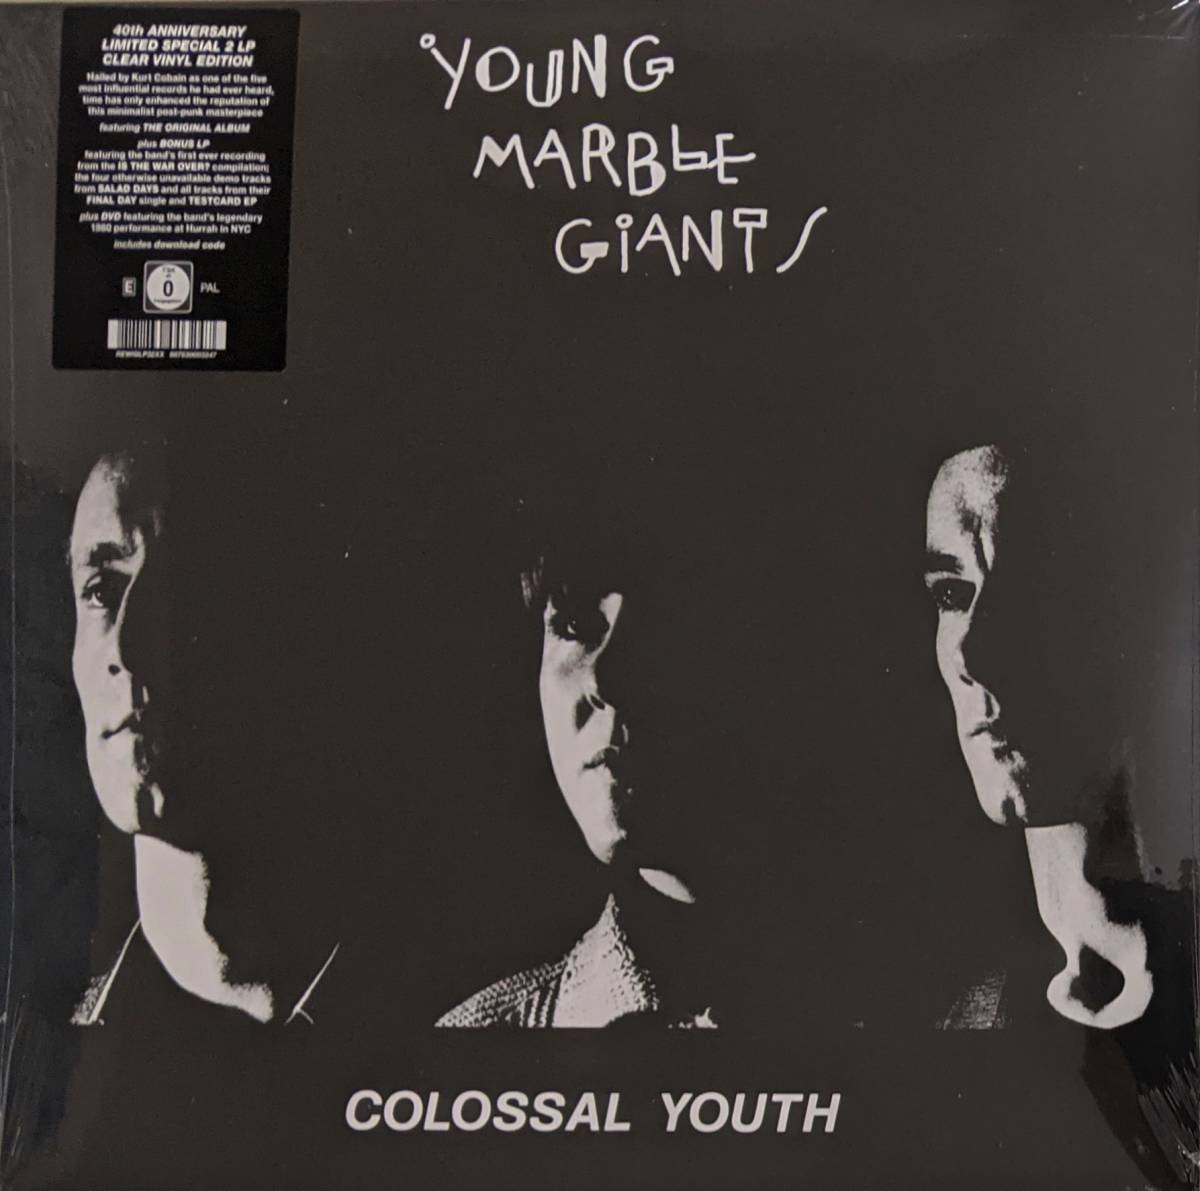 Young Marble Giants - Colossal Youth - 40th Anniversary Edition PAL方式DVD付き限定二枚組アナログ・レコード